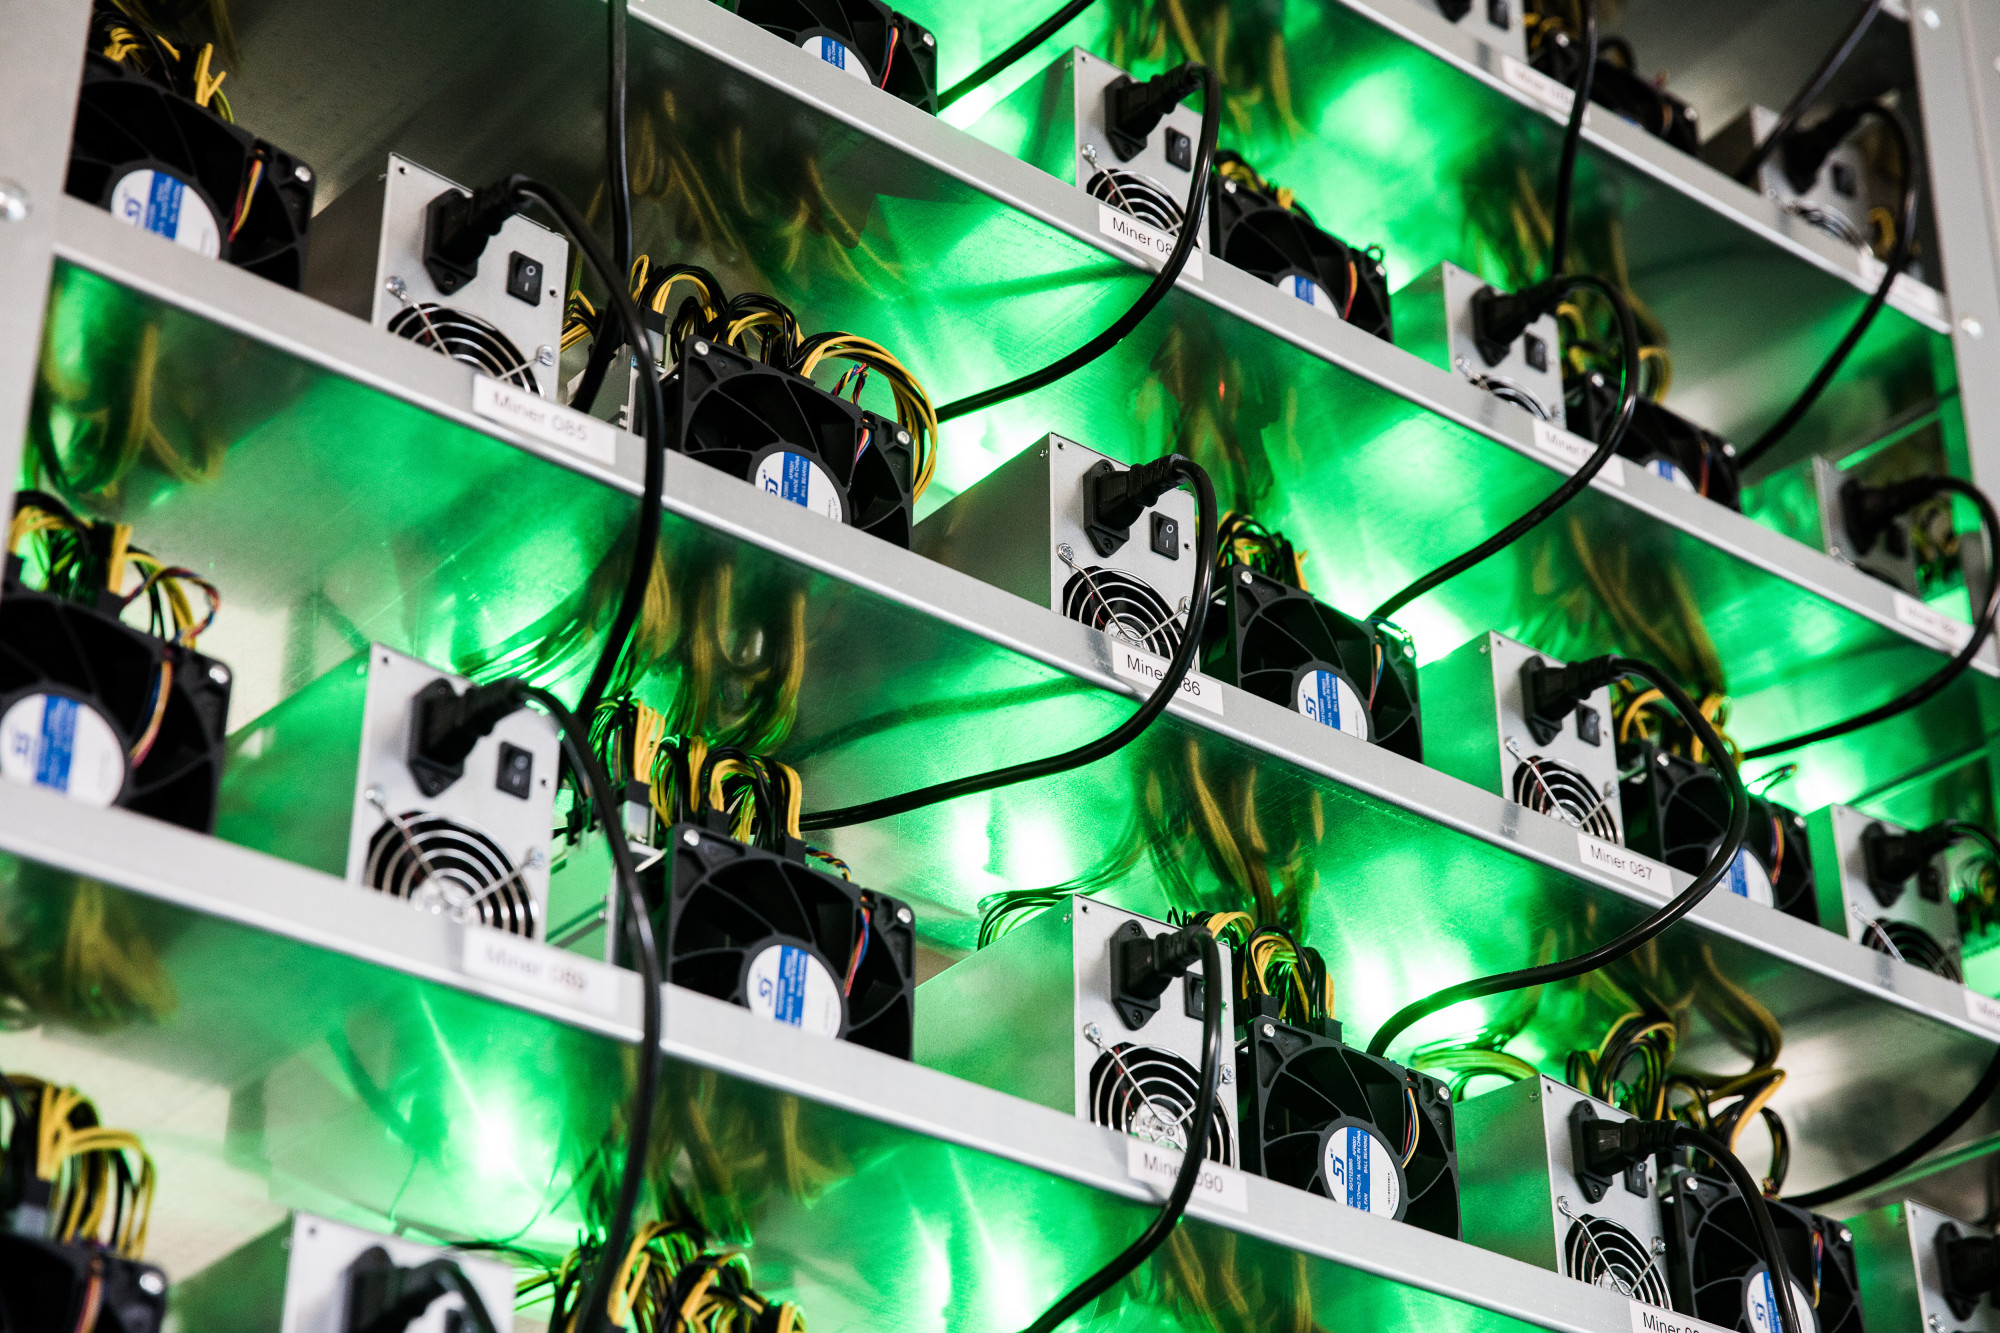 Cryptocurrency mining rigs composed of Antminer S9 ASIC machines operate on racks at the HydroMiner GmbH cryptocurrency mining facility near Waidhofen an der Ybbs, Austria. Photographer: Akos Stiller/Bloomberg